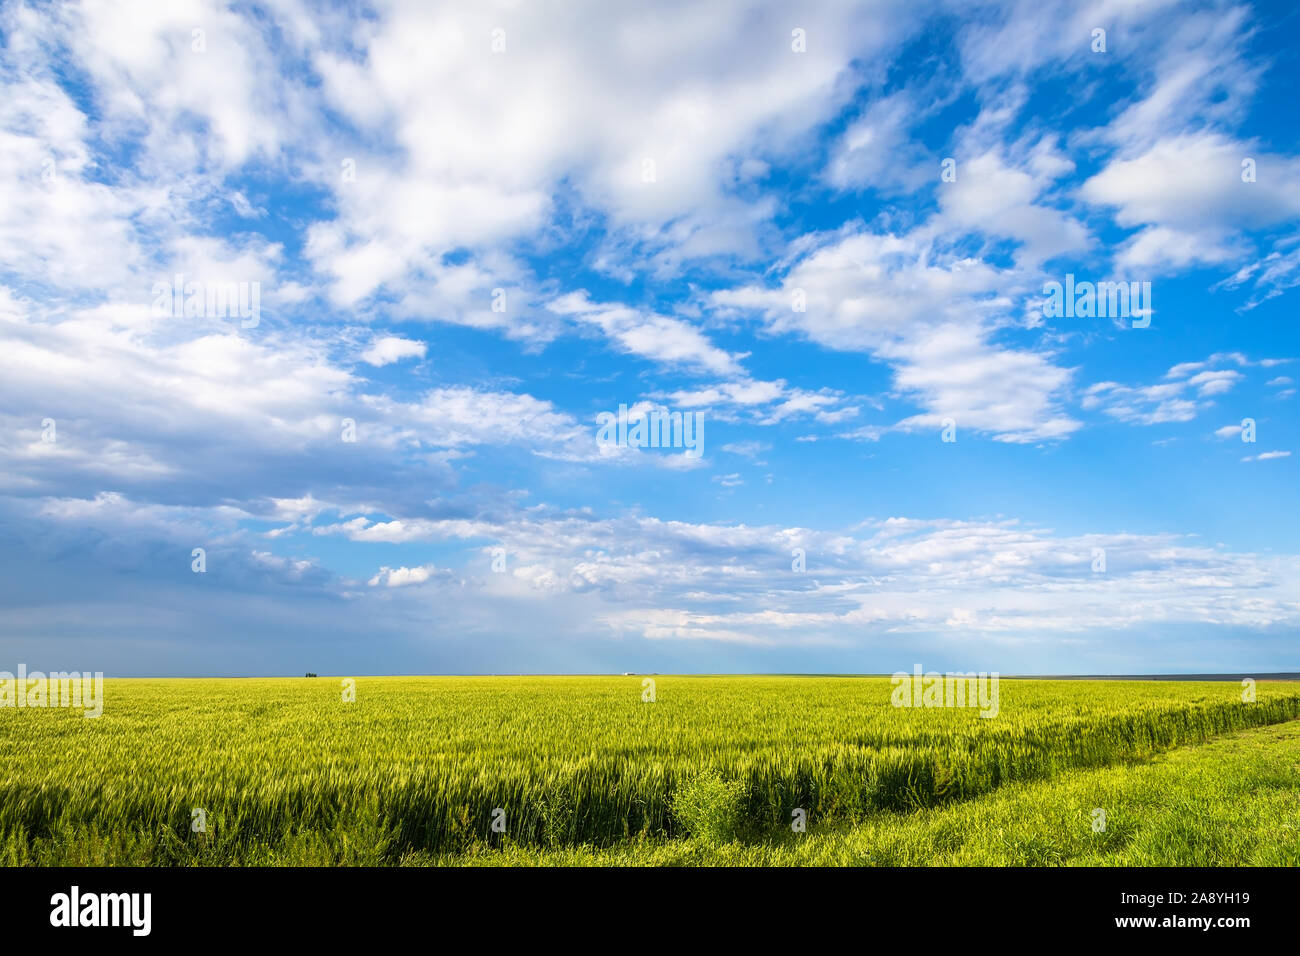 Scenic Great Plains landscape and idyllic farm field with blue sky and clouds in the background near Altus, Oklahoma. Stock Photo